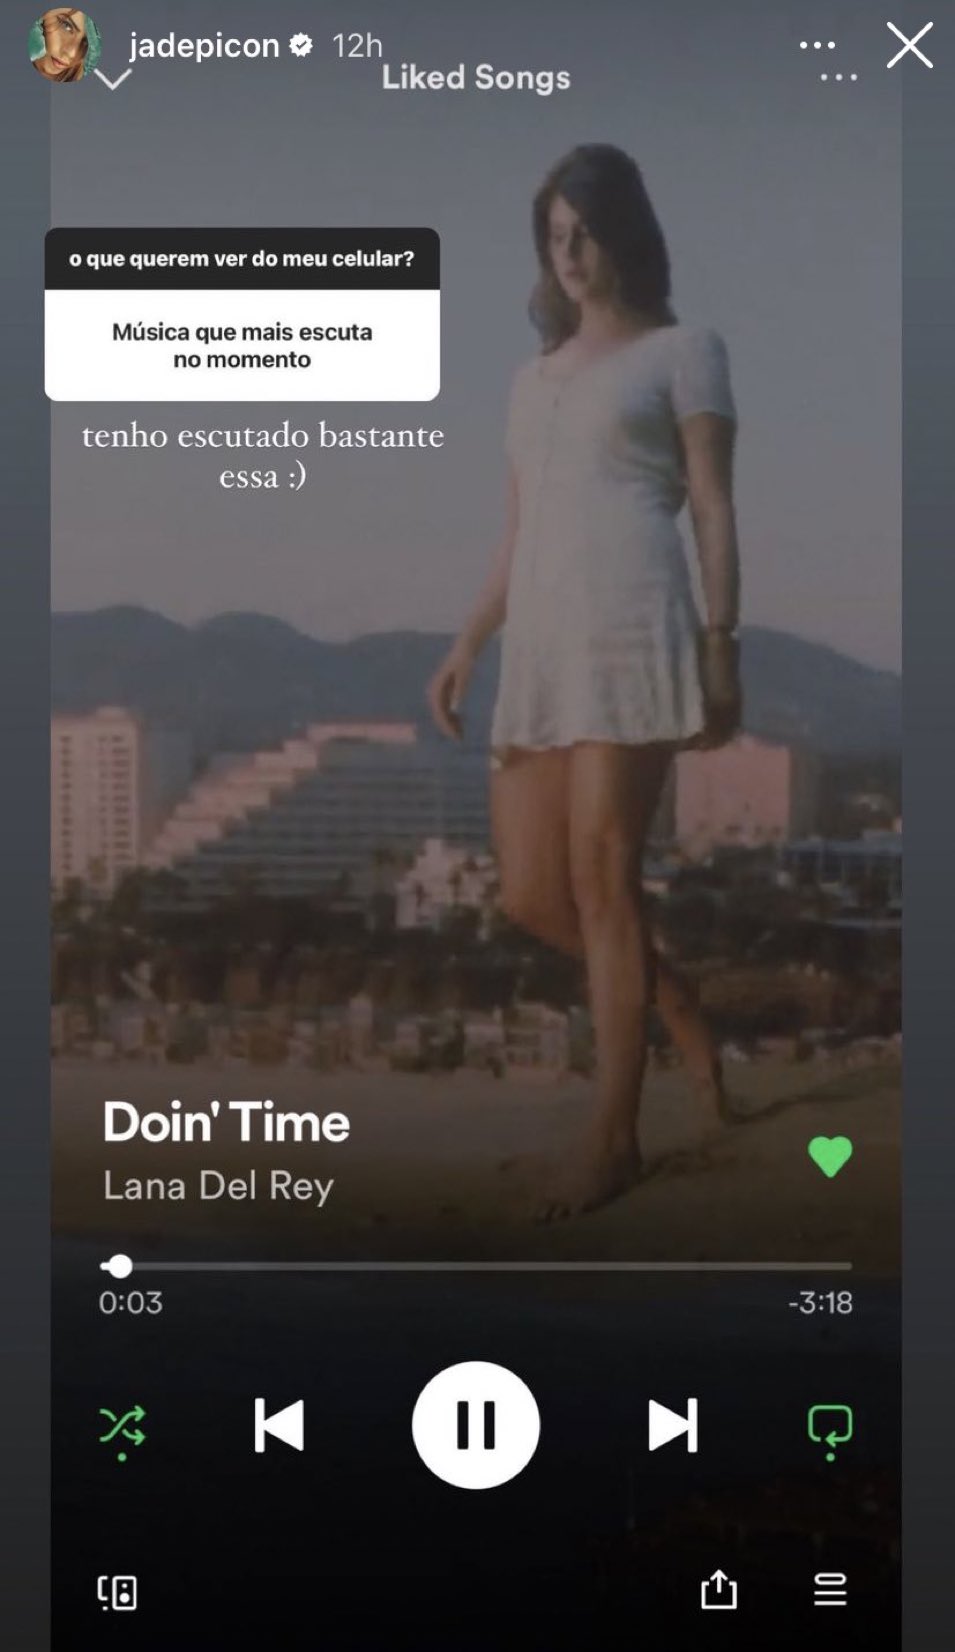 Lana Del Rey Online on Twitter: "Jade Picon reveals her favorite song at  the moment is Doin Time by Lana Del Rey ❤️ https://t.co/y06wvVXyUV" /  Twitter